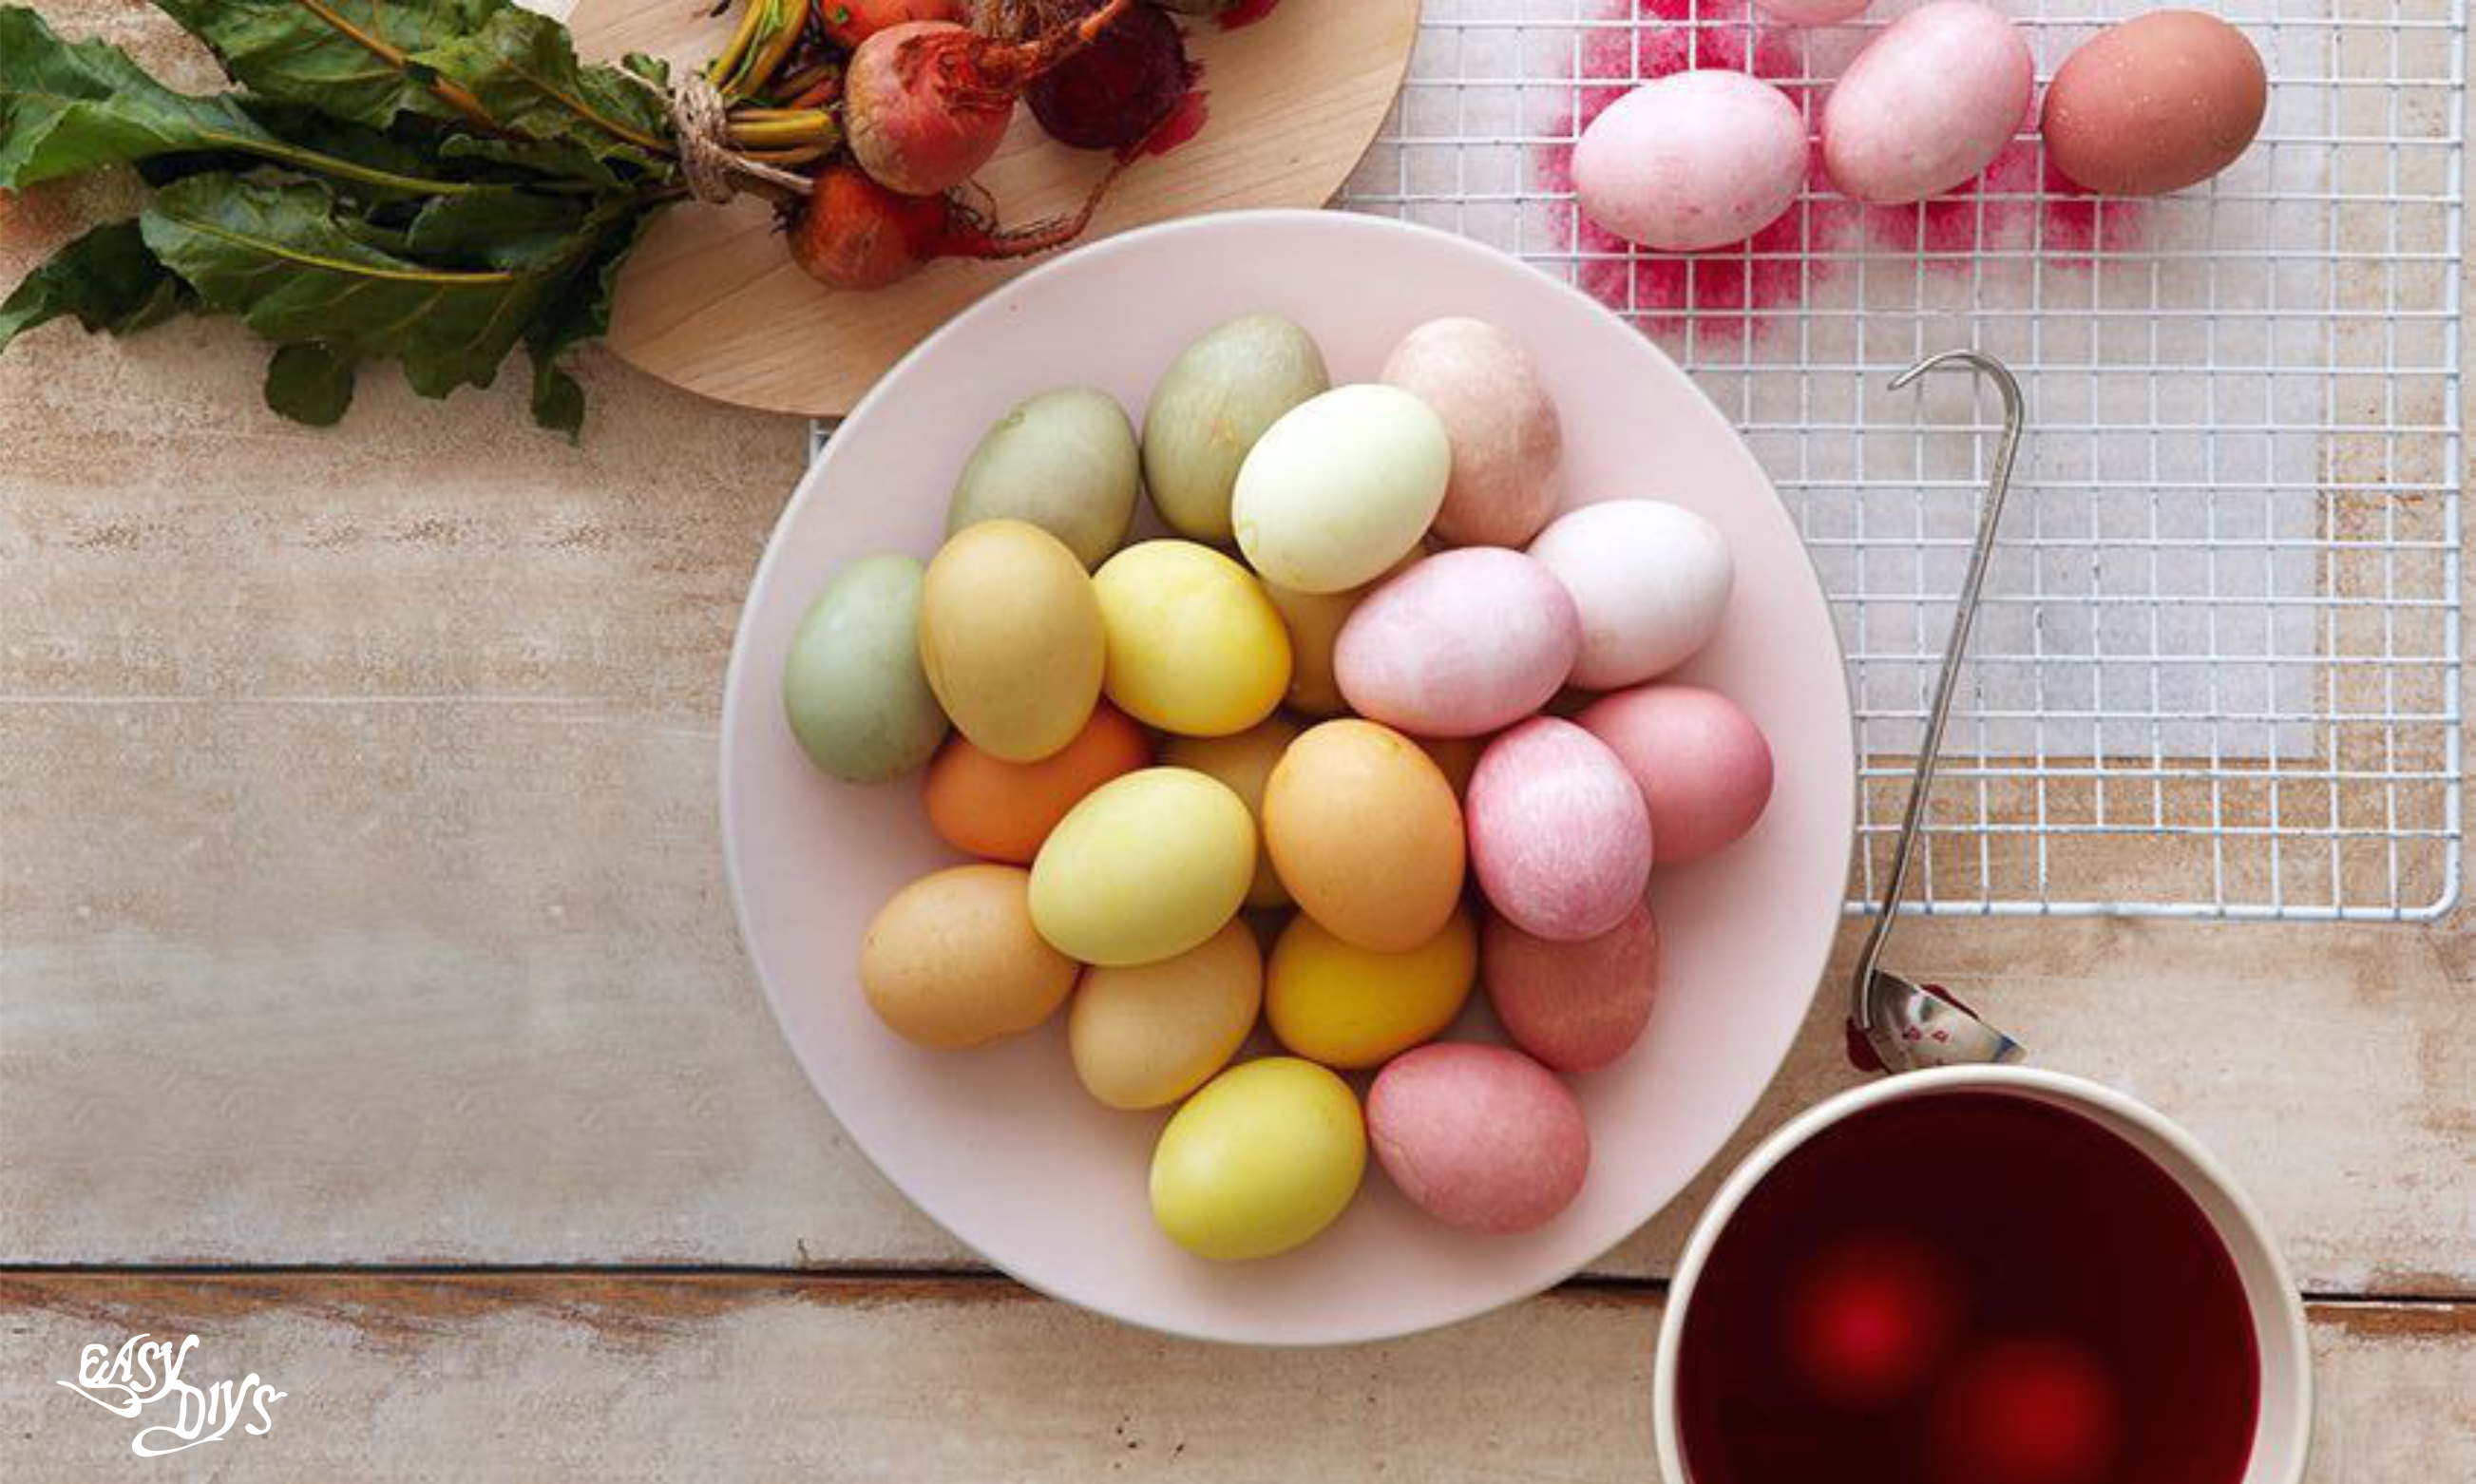 How to dye eggs the natural way